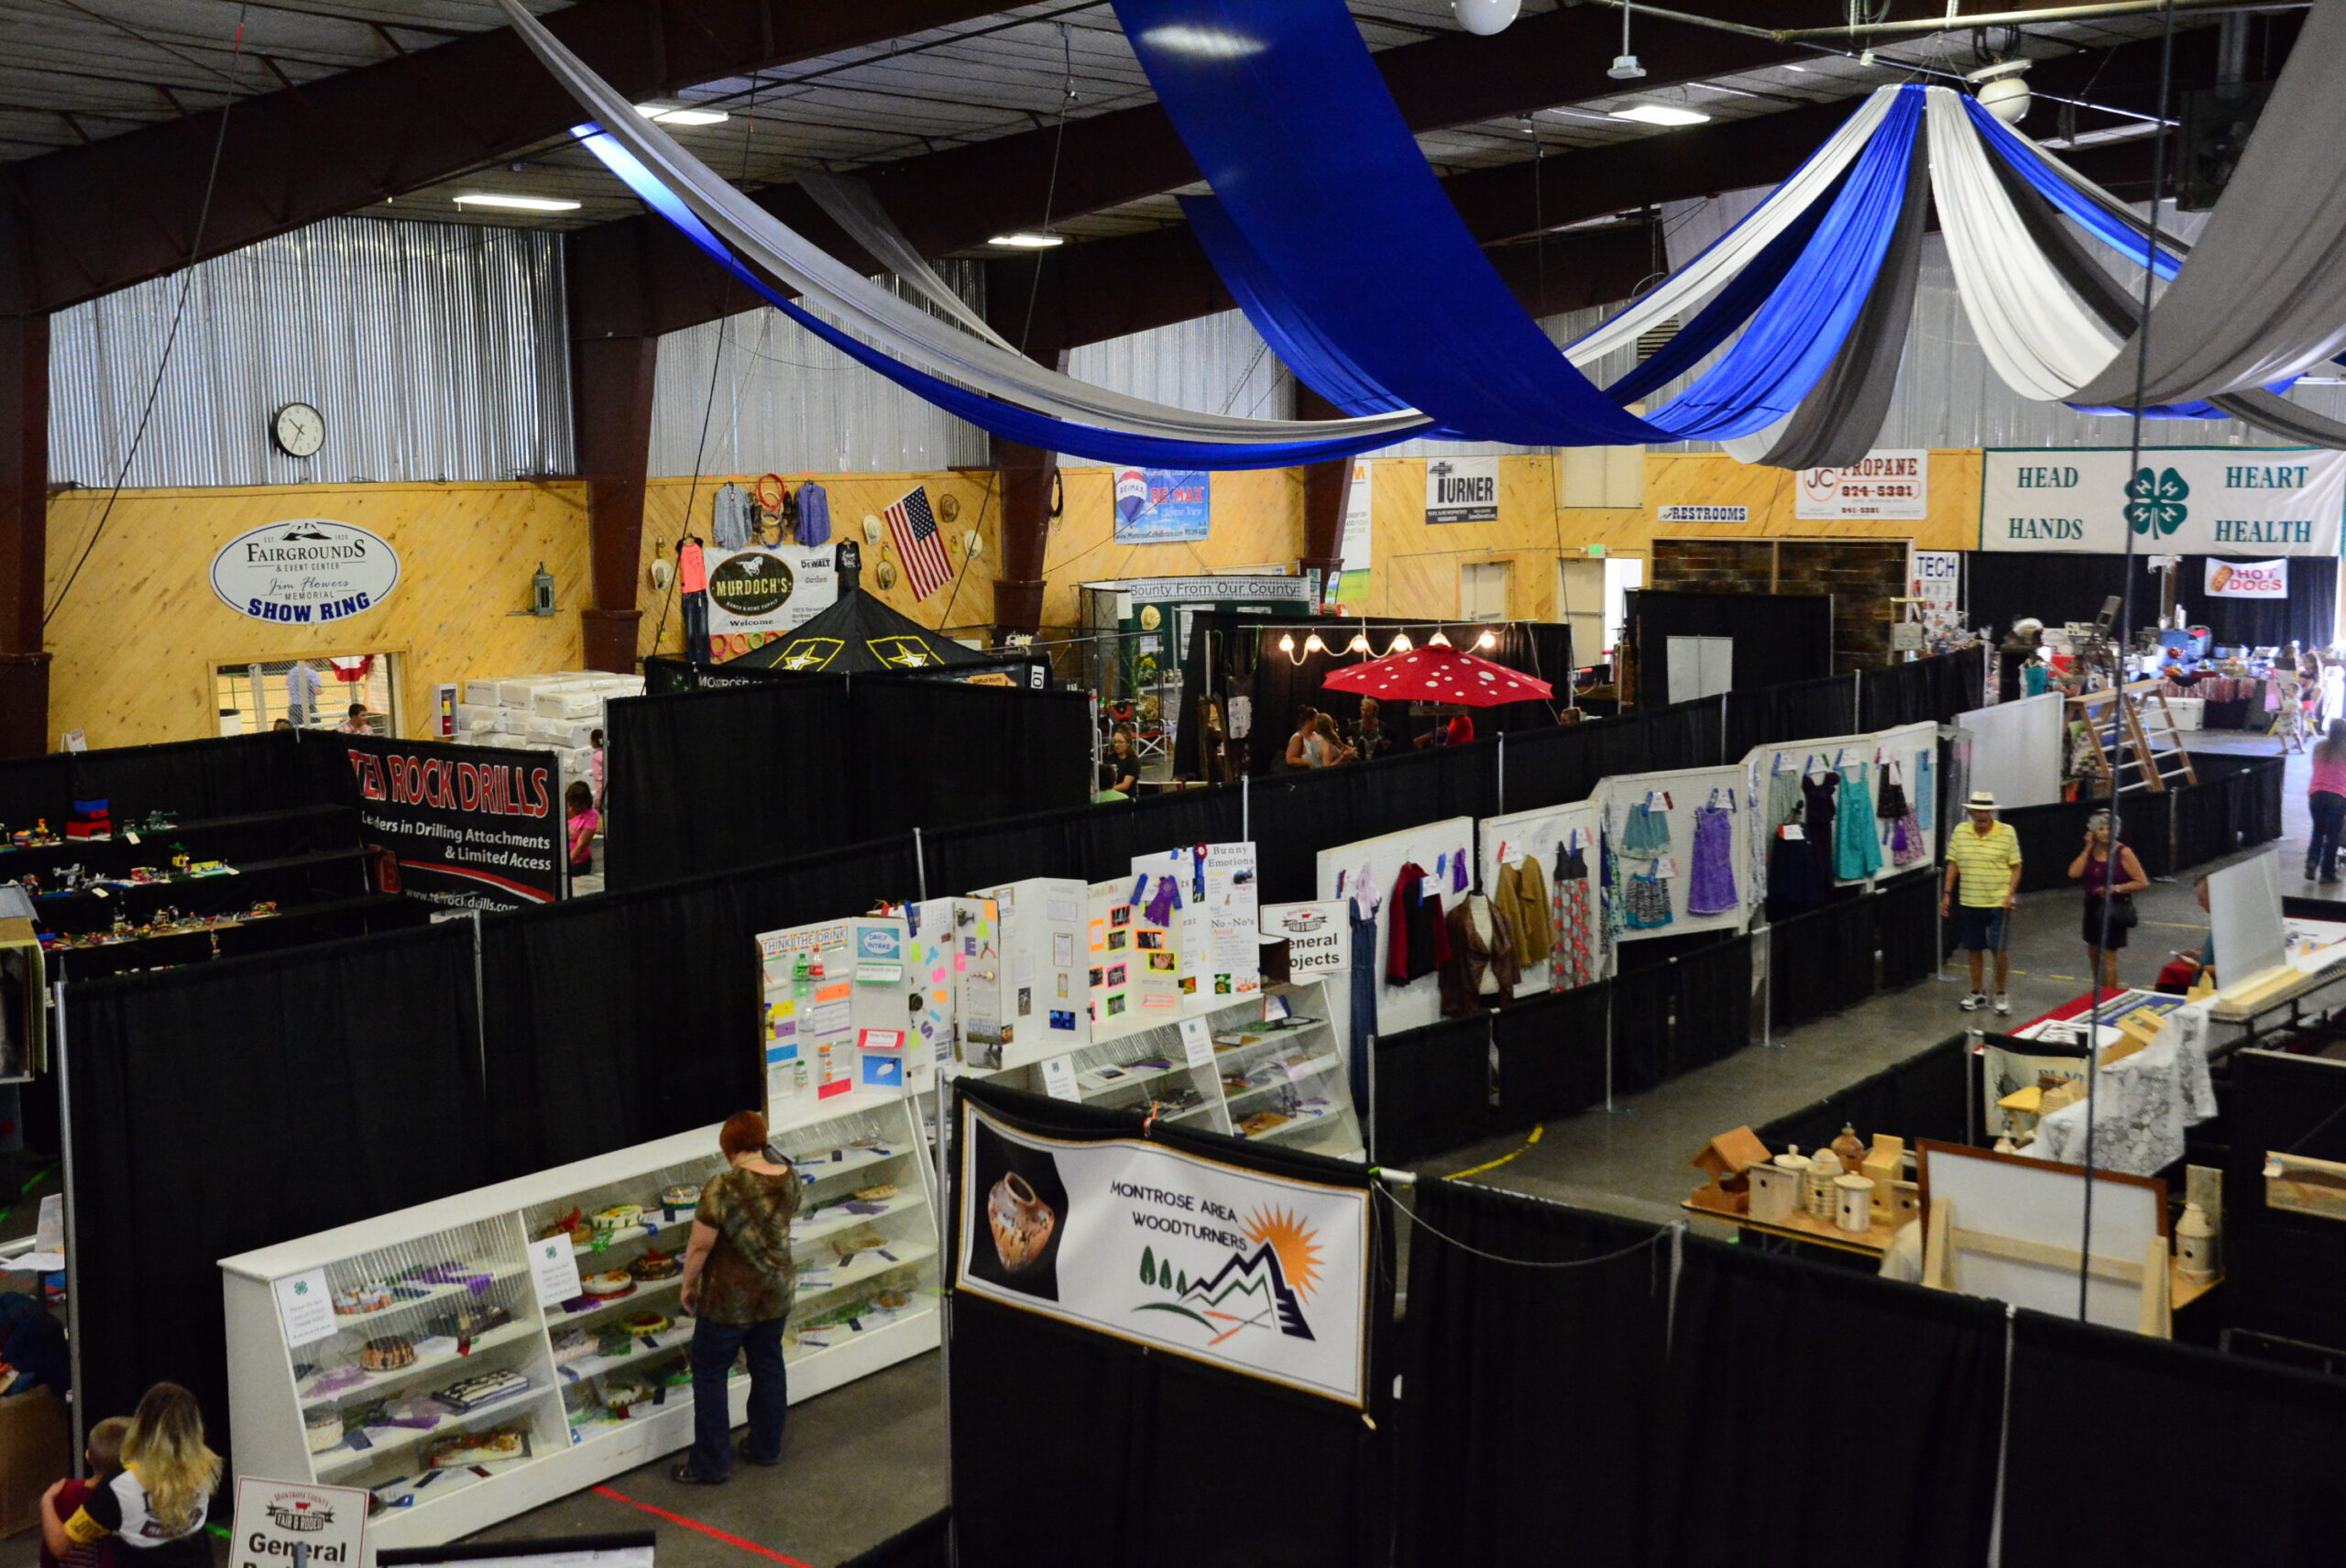 friendship hall set up at fair with booths of displays